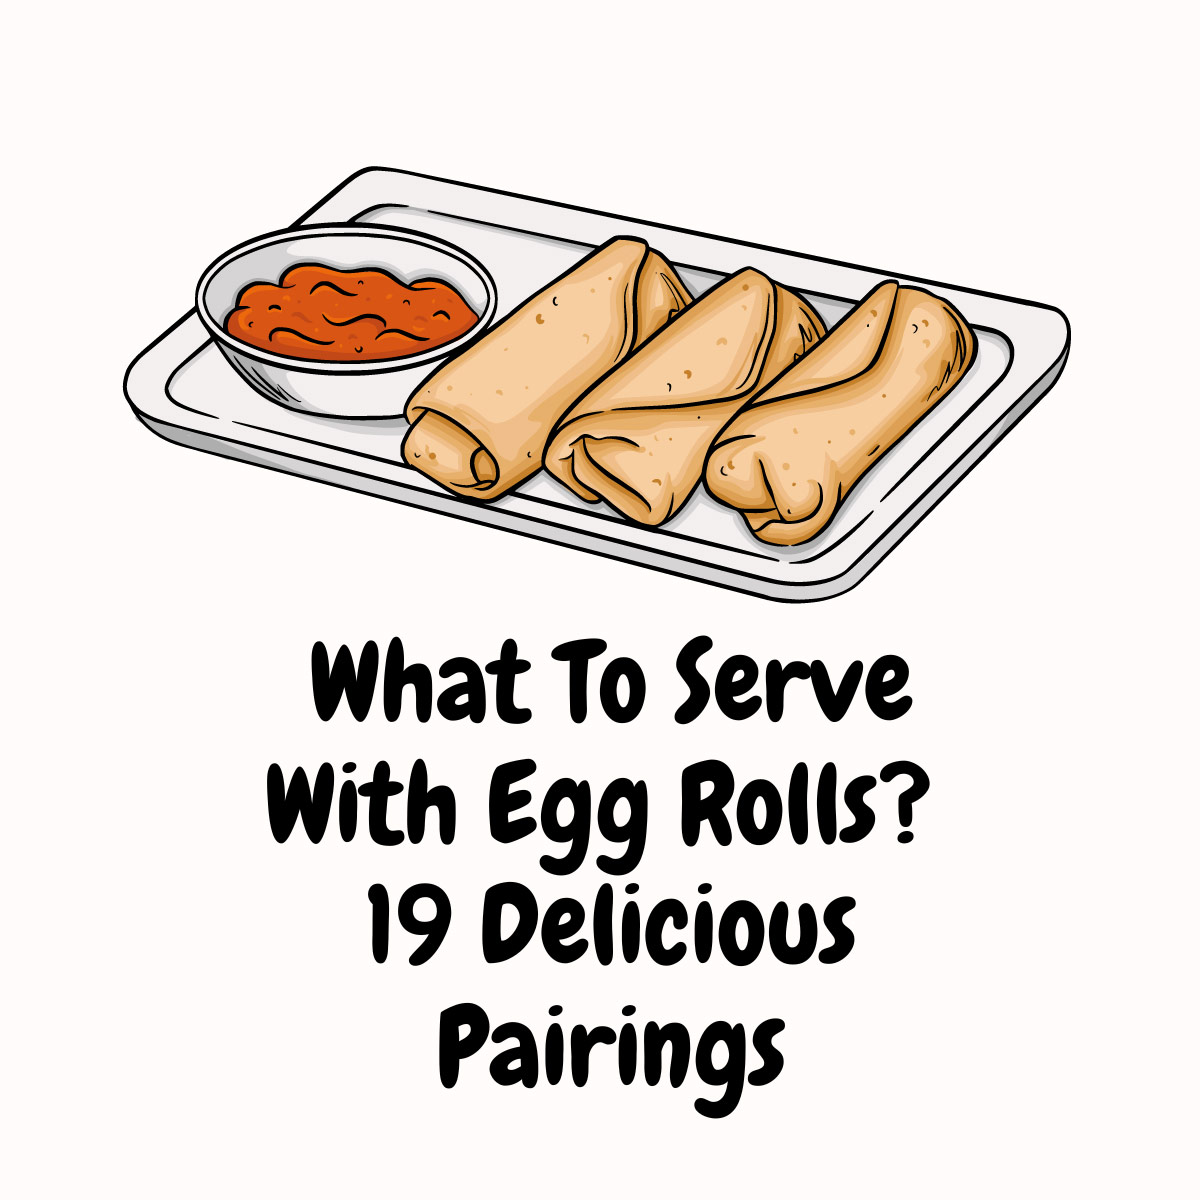 What To Serve With Egg Rolls featured image | Girl Meets Food